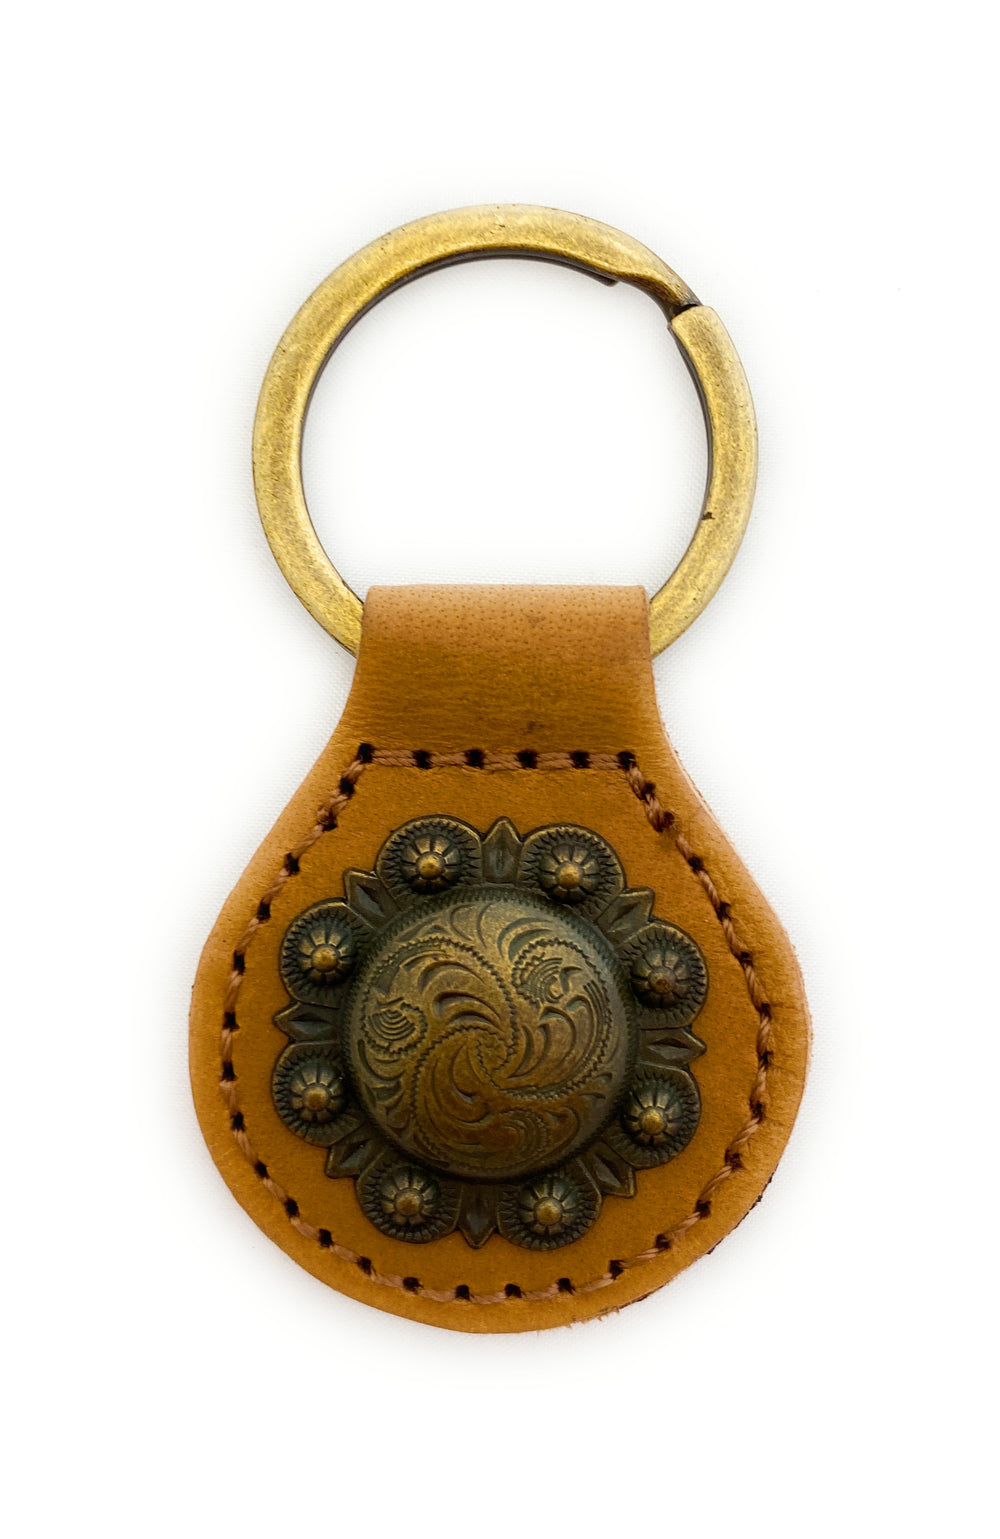 Montana West Real Leather Key Chain - Engraved Berry Concho Brown